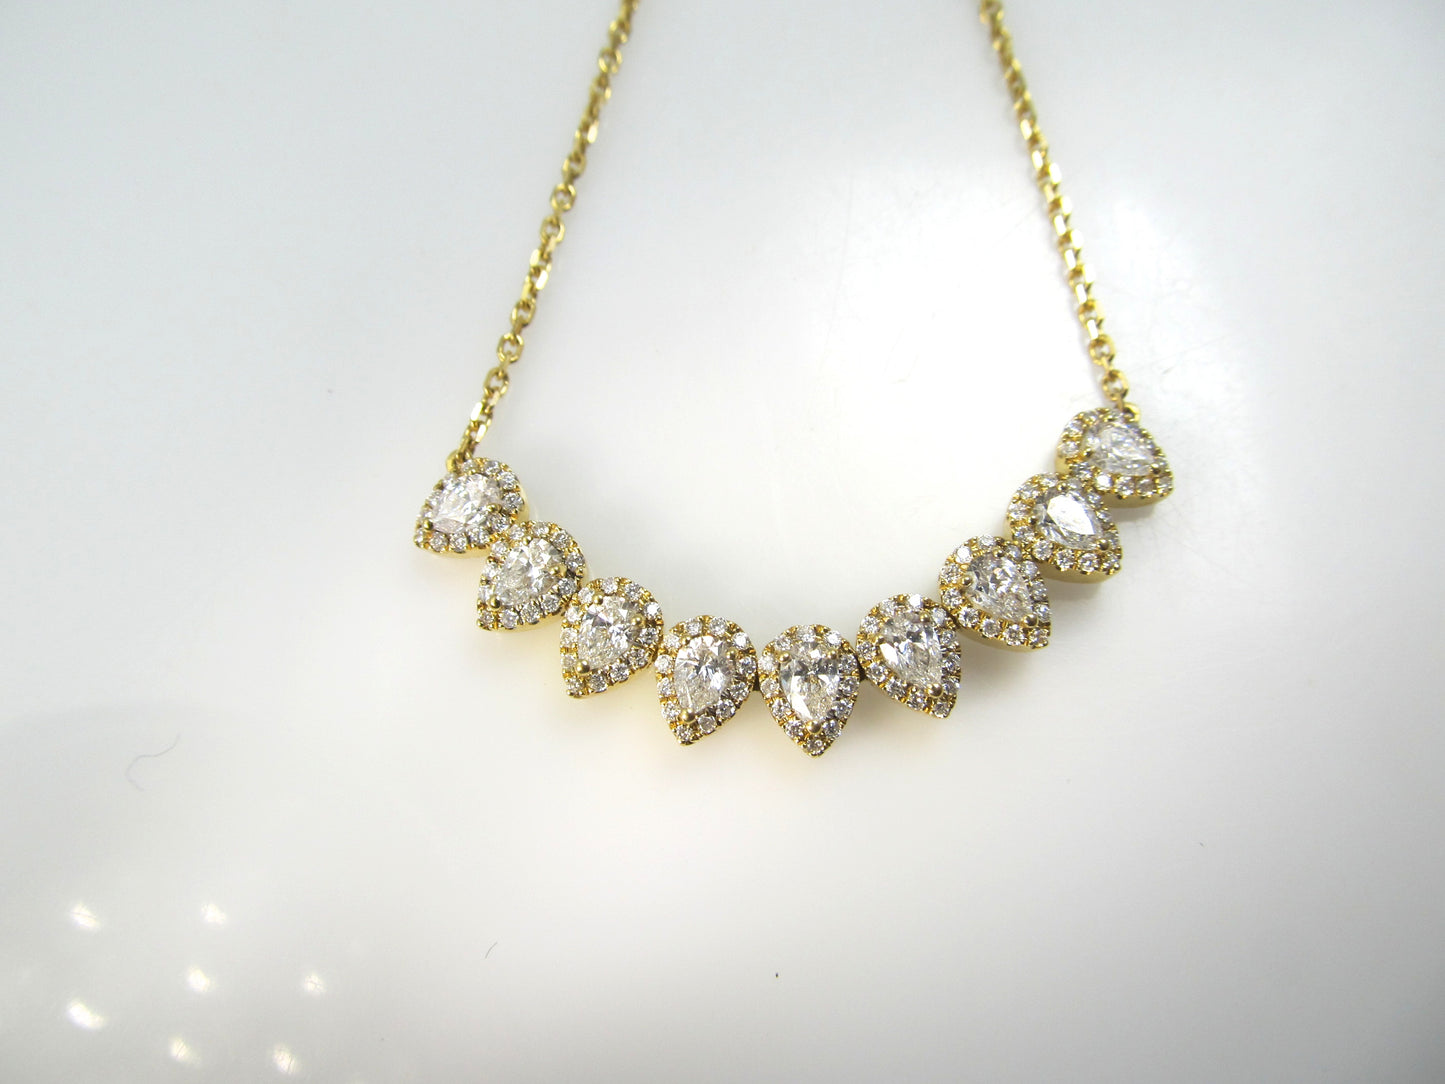 18k Yellow Gold Necklace With 2cts In Round And Pear Cut Diamonds